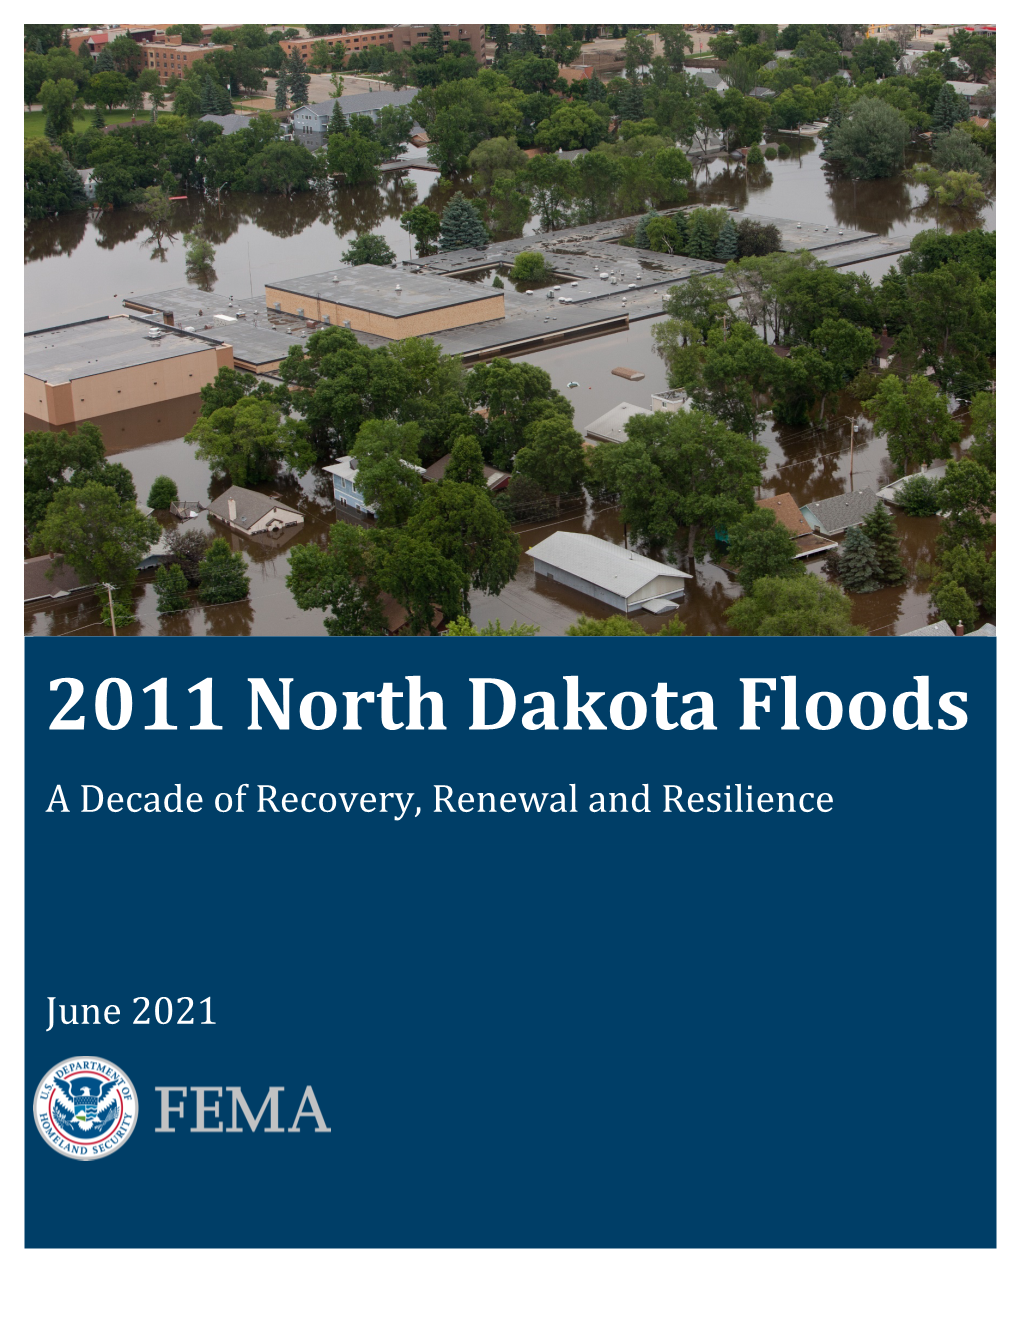 2011 North Dakota Floods a Decade of Recovery, Renewal and Resilience